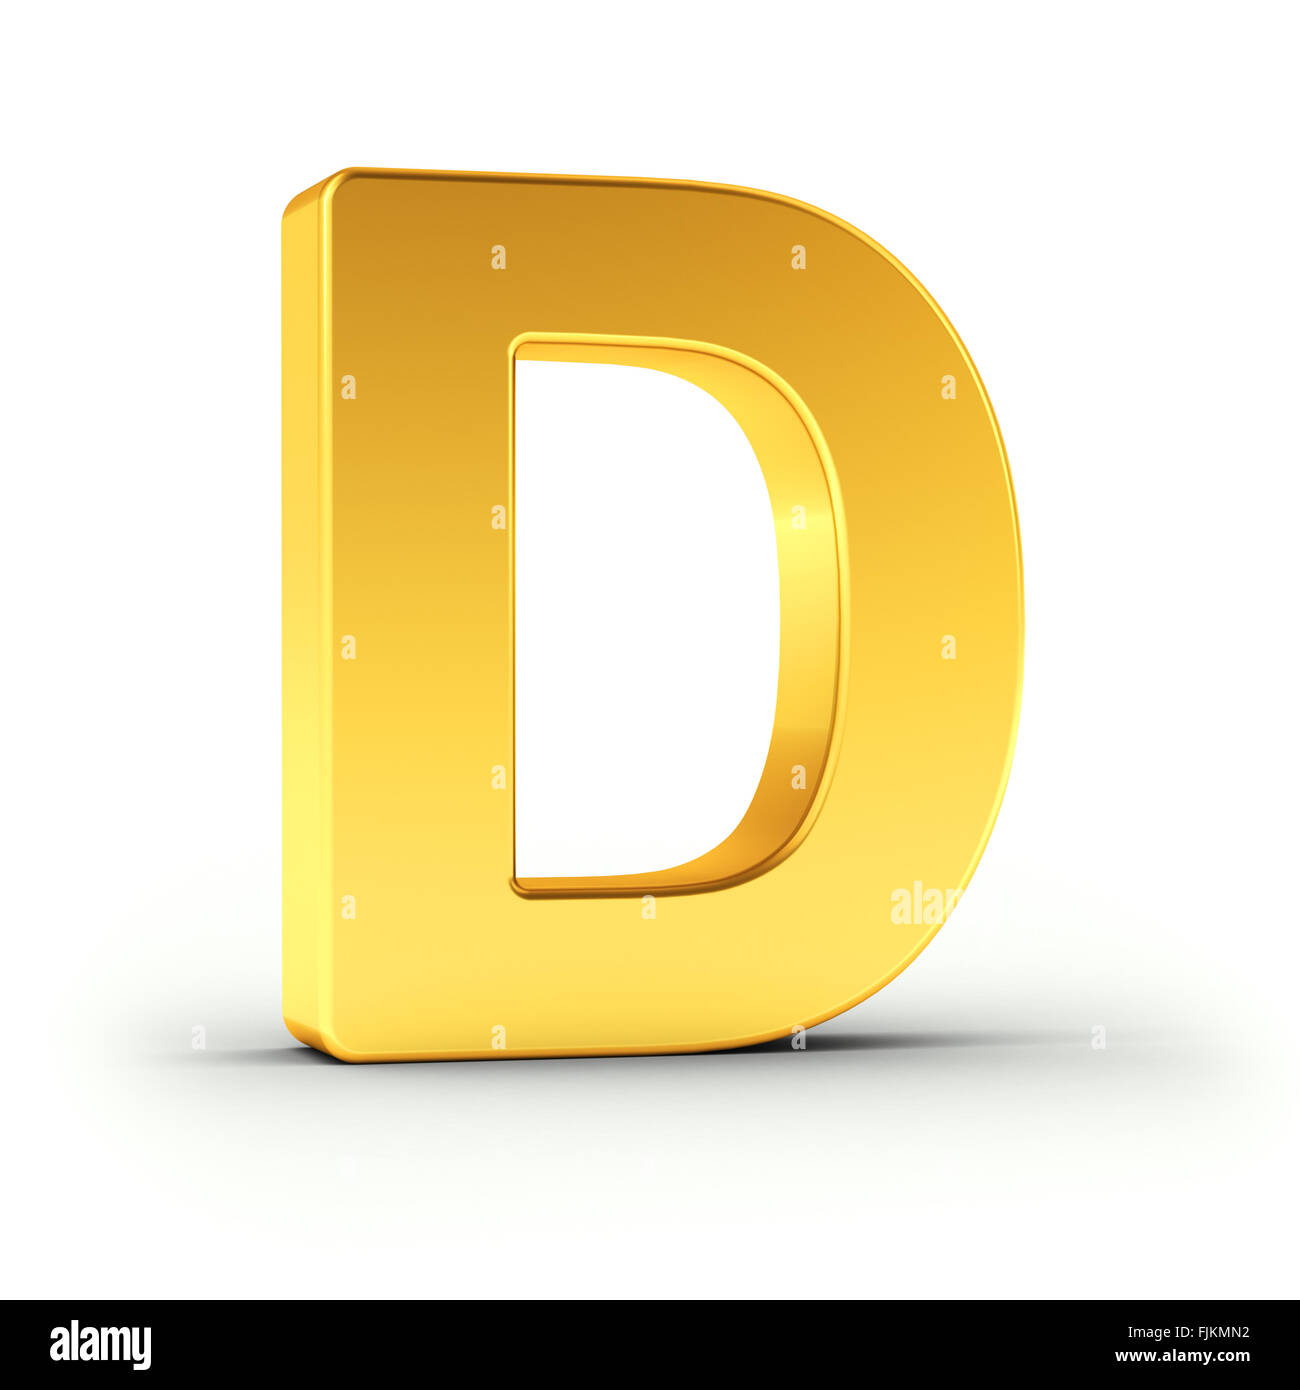 The Letter D as a polished golden object Stock Photo